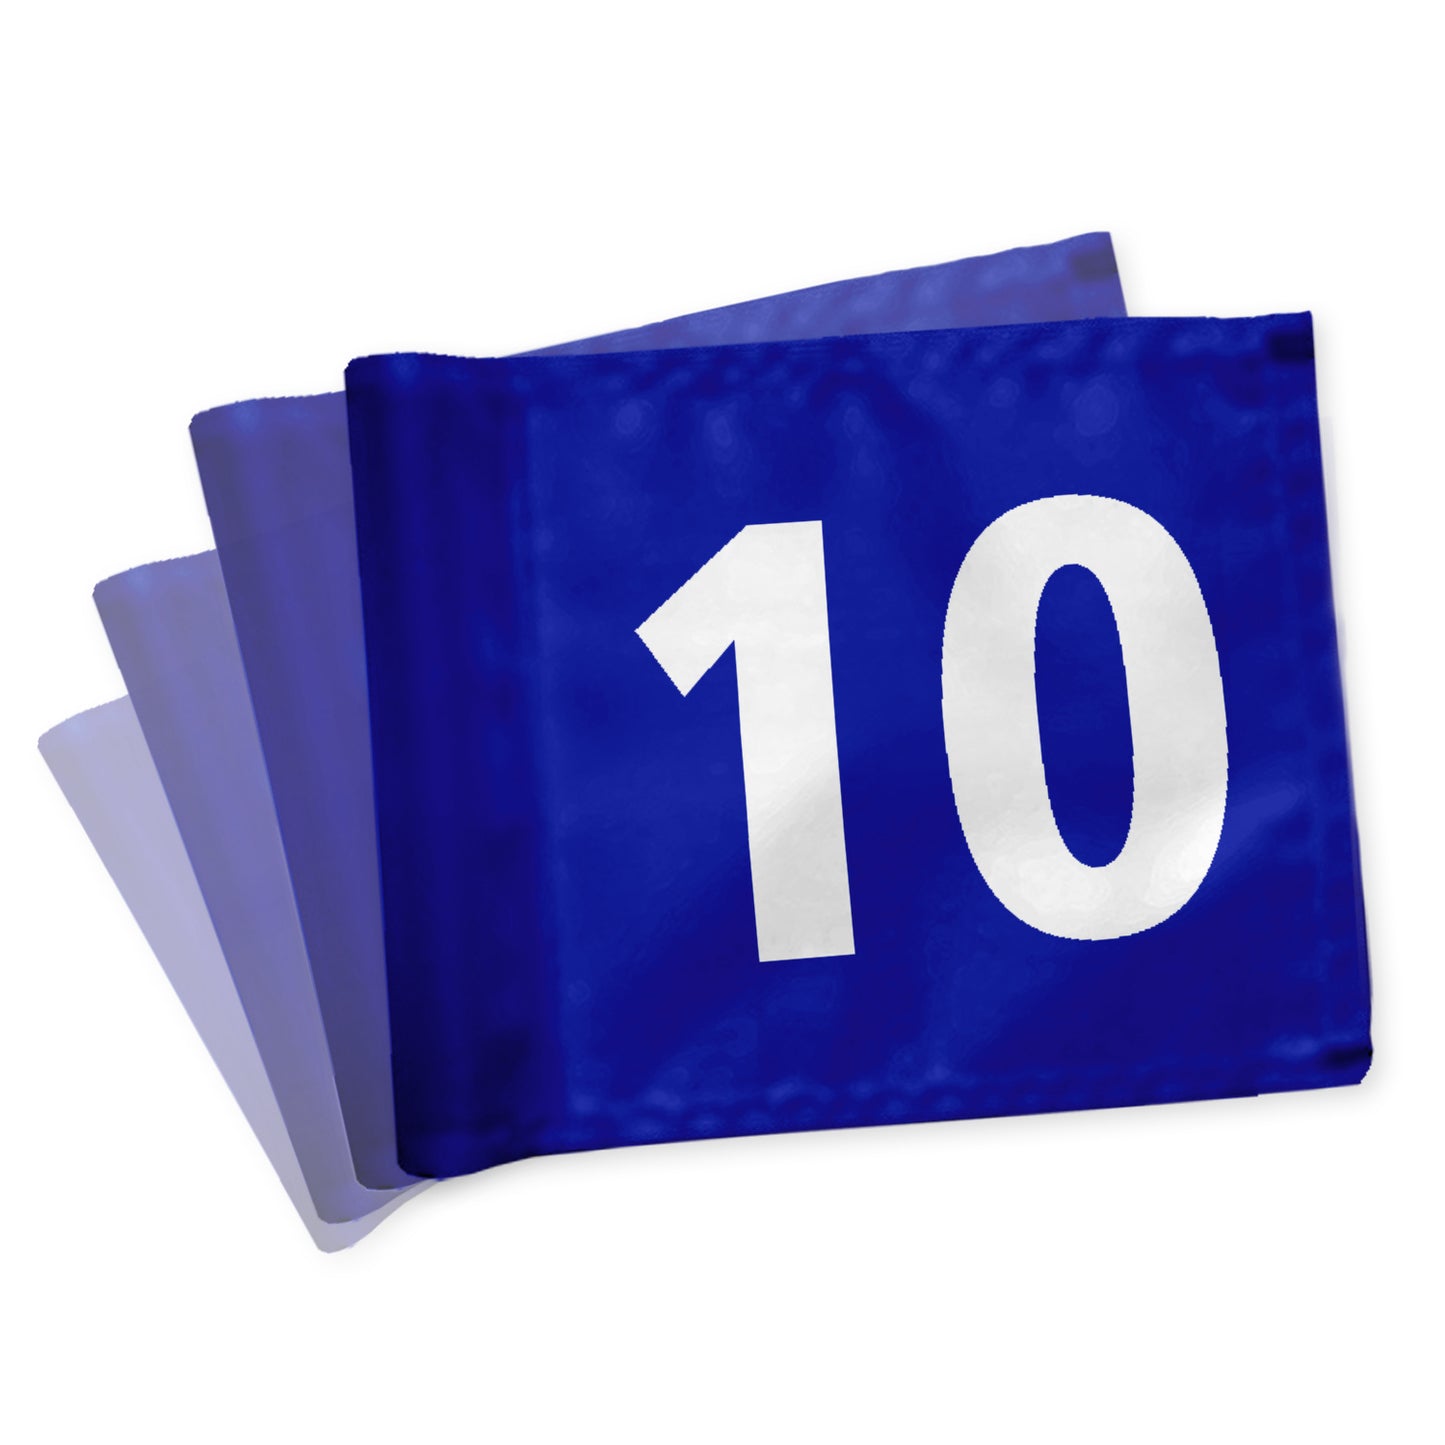 Puttinggreenflags 10-18, one-sided, blue with white numbers, 200 gram fabric